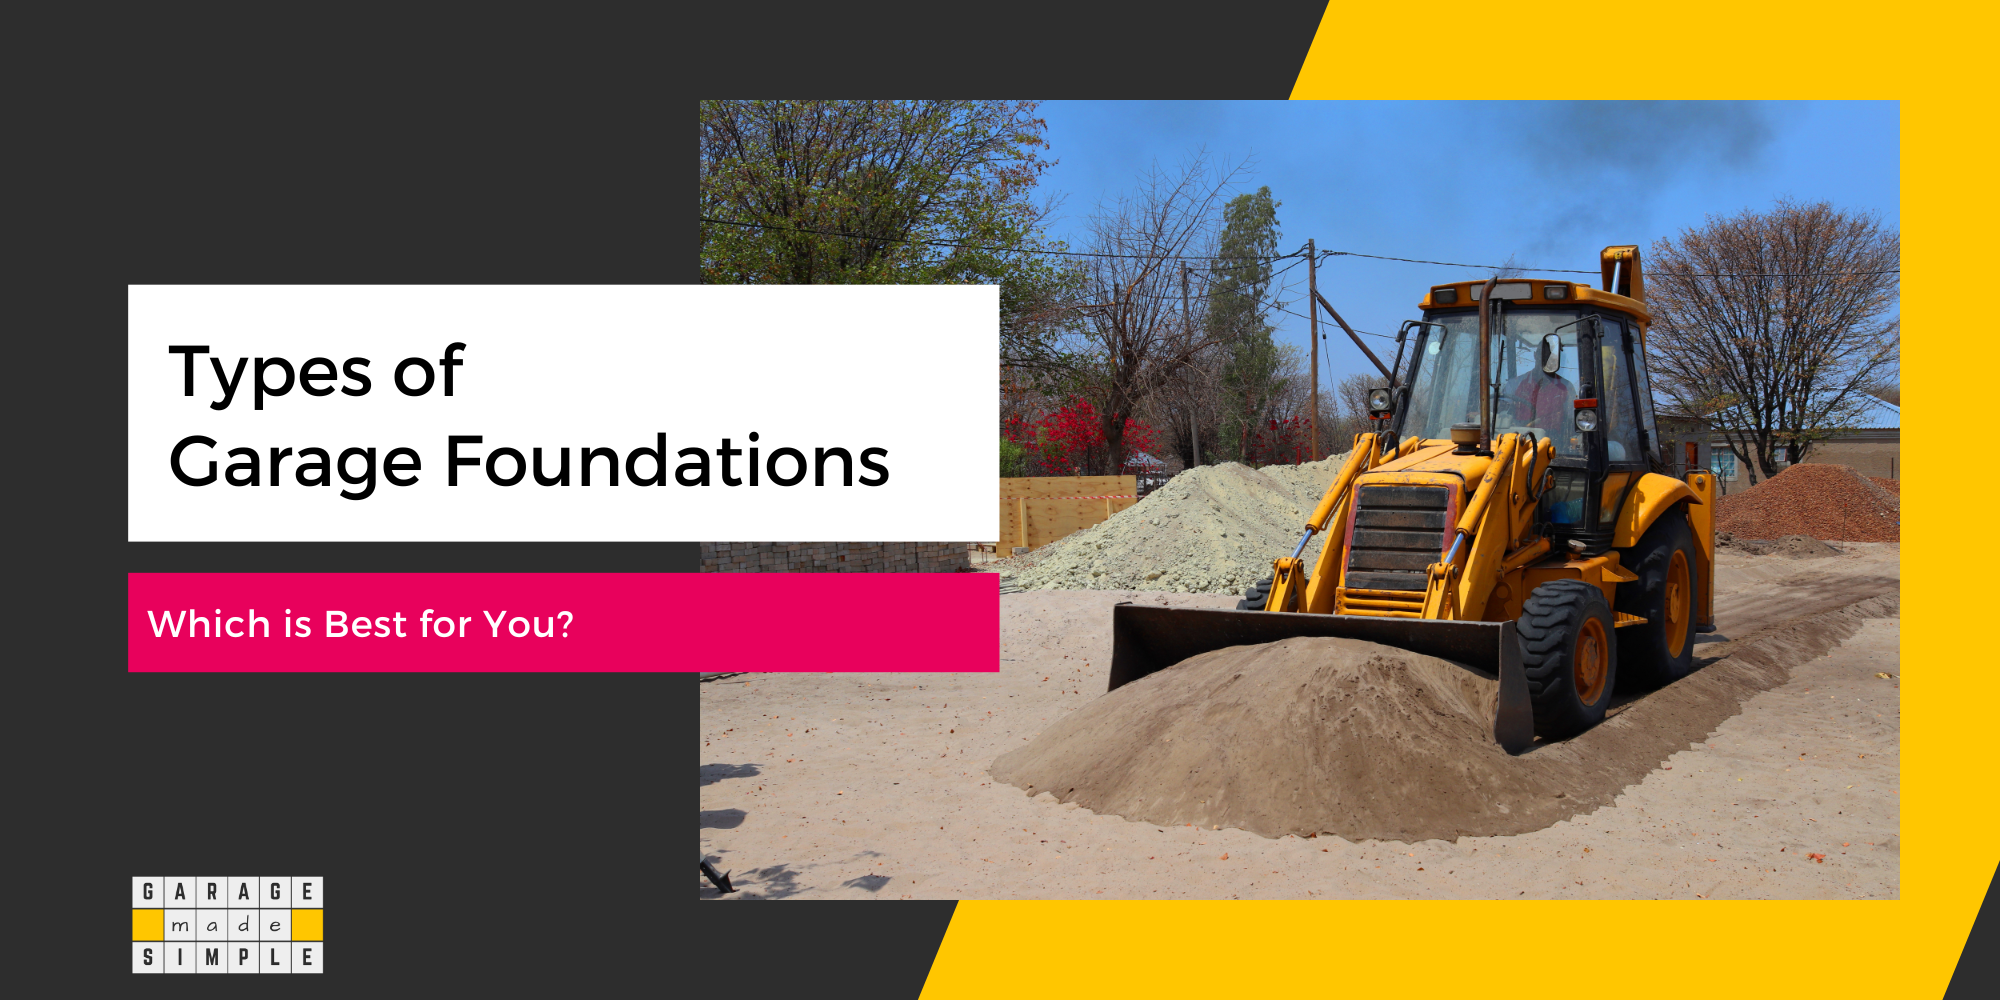 Types of Garage Foundations